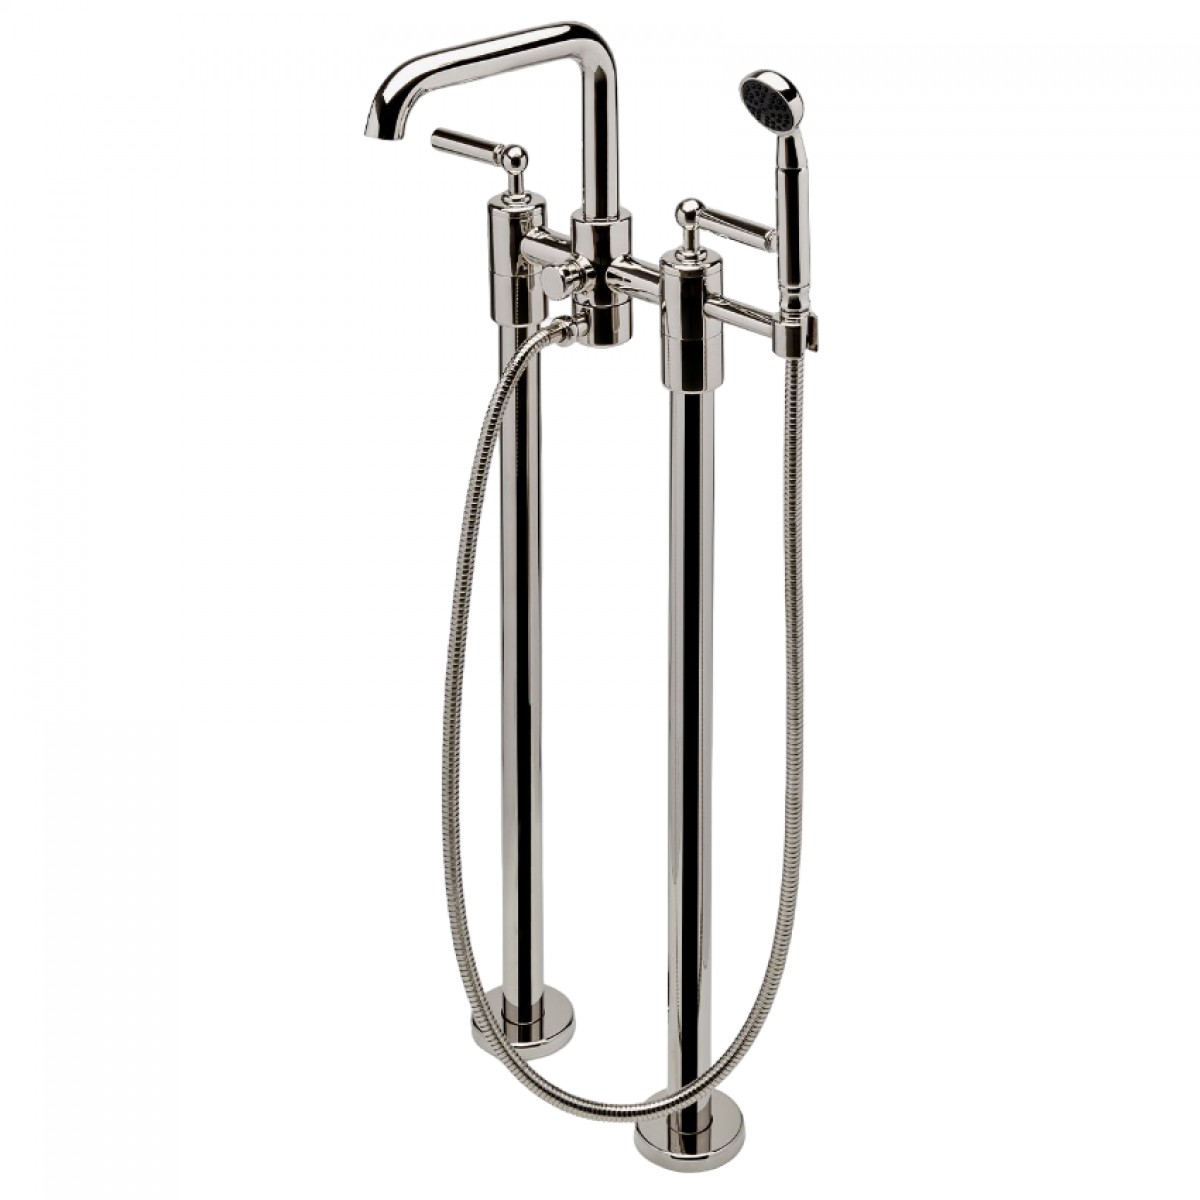 Ludlow Floor Mounted Exposed Tub Filler with Handshower and Lever Handles